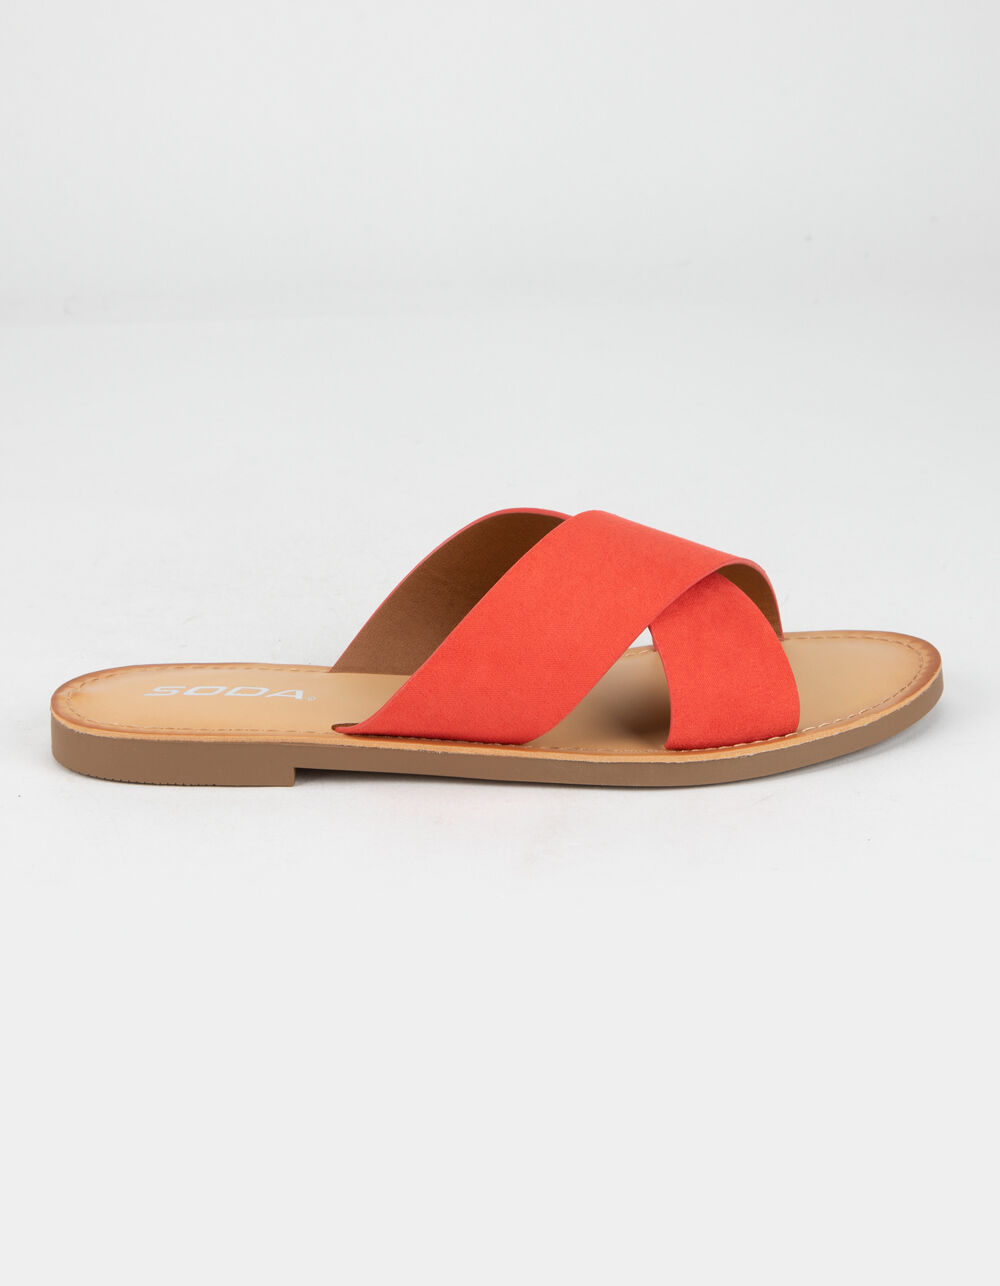 SODA Criss Cross Womens Coral Slide Sandals - CORAL | Tillys